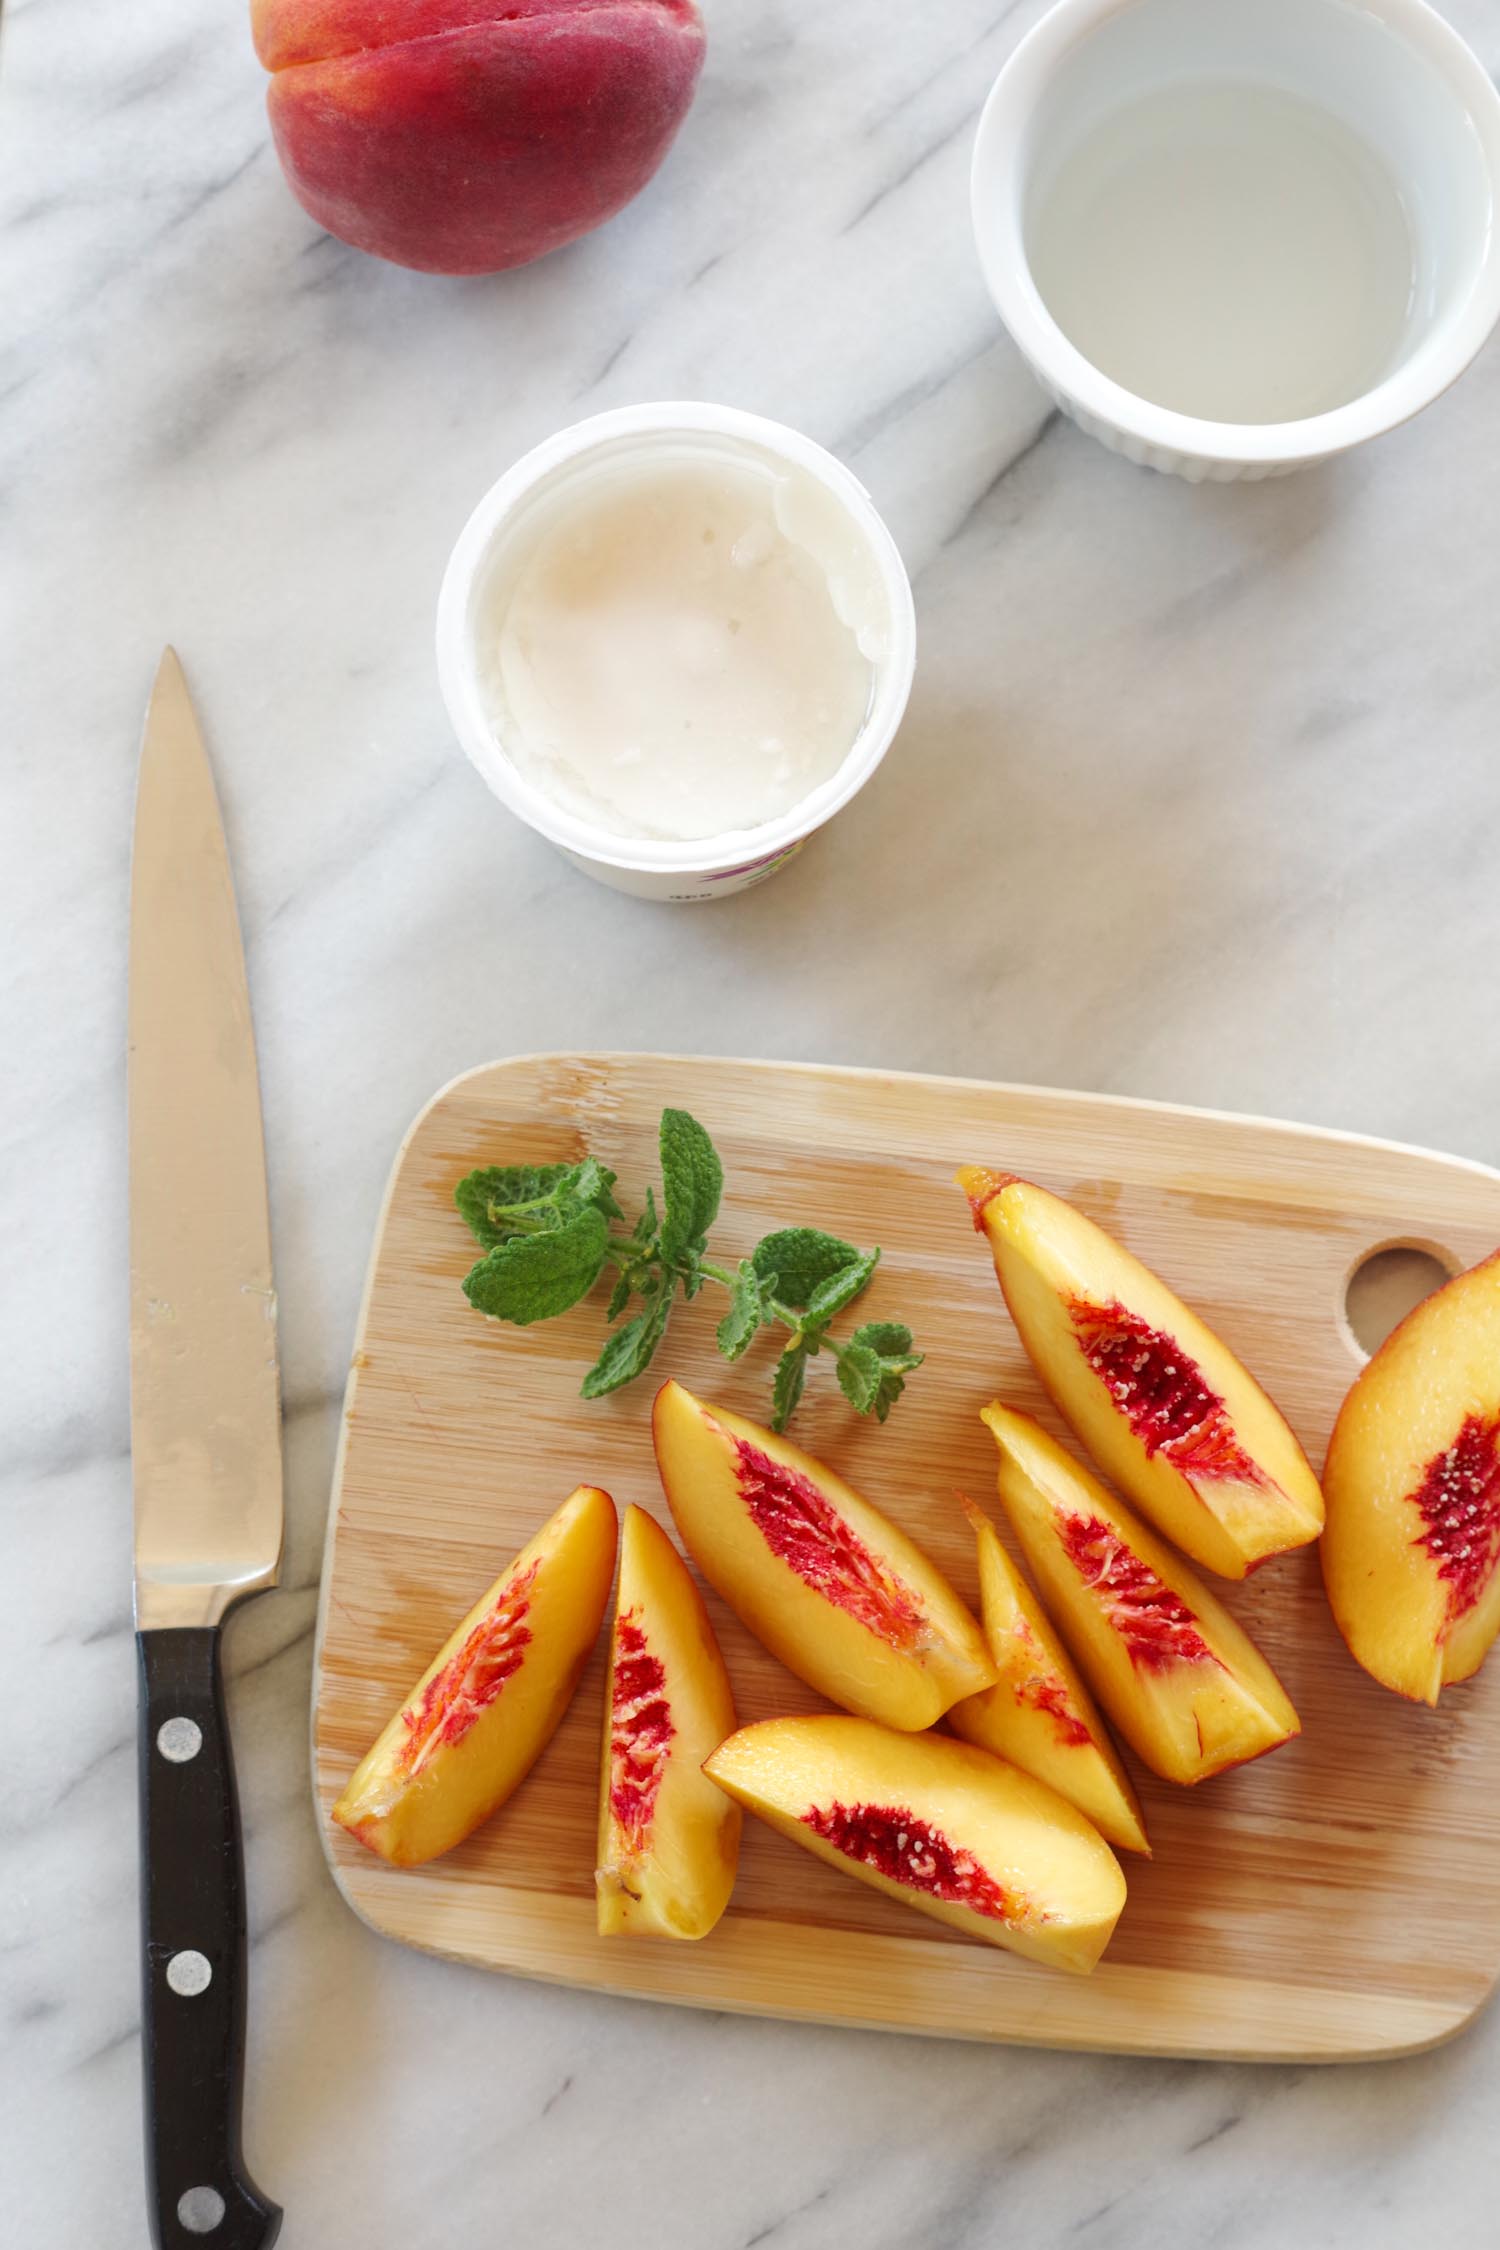 Coconut Peach Popsicle Ingredients, from the cookbook, Frugal Vegan. Photo by Beautiful Ingredient.